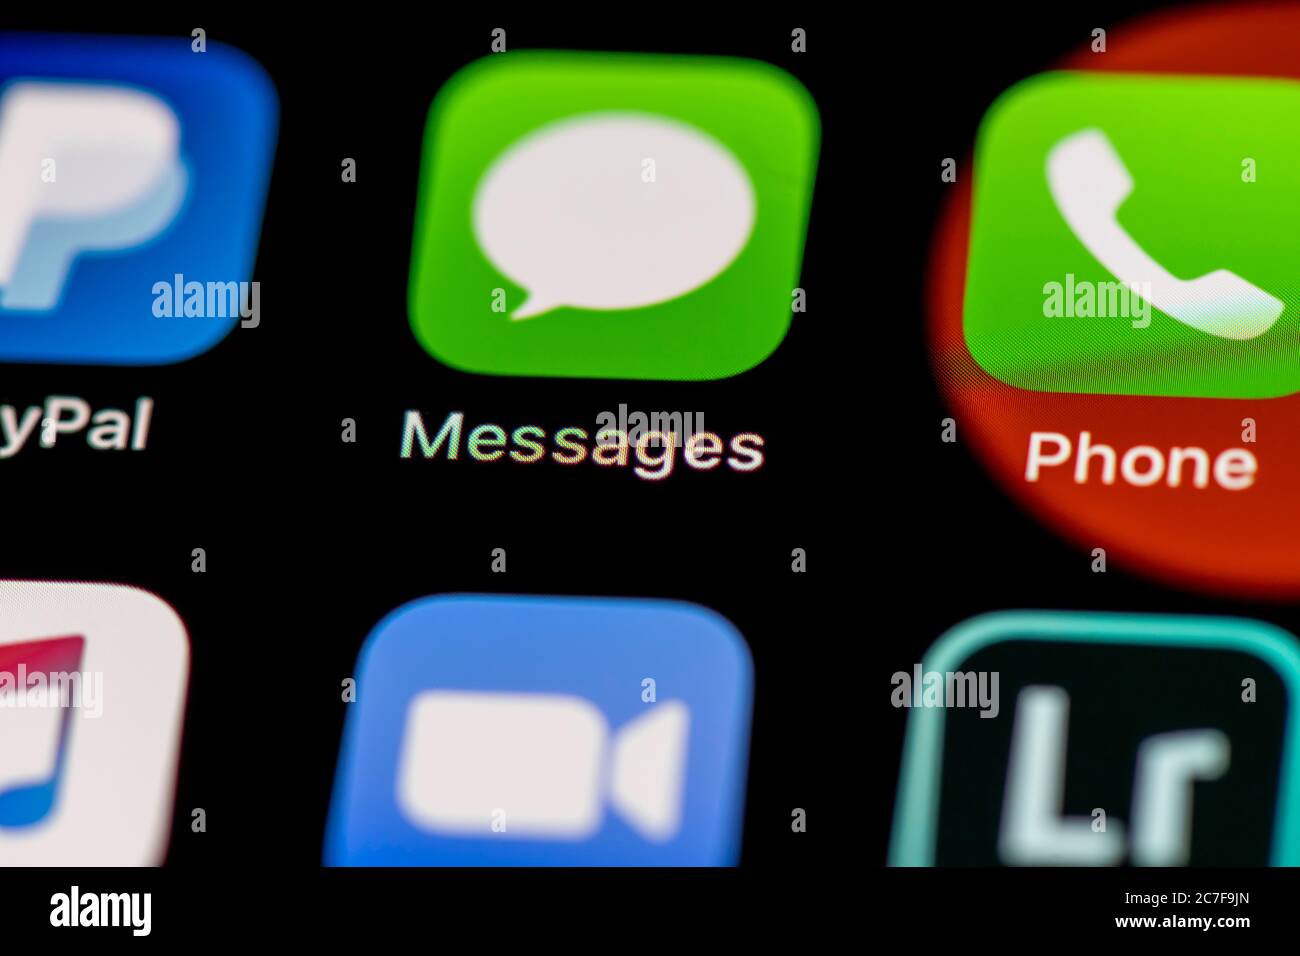 Messages and Phone Icon, App Icons on a mobile phone display, iPhone, Smartphone, close-up Stock Photo